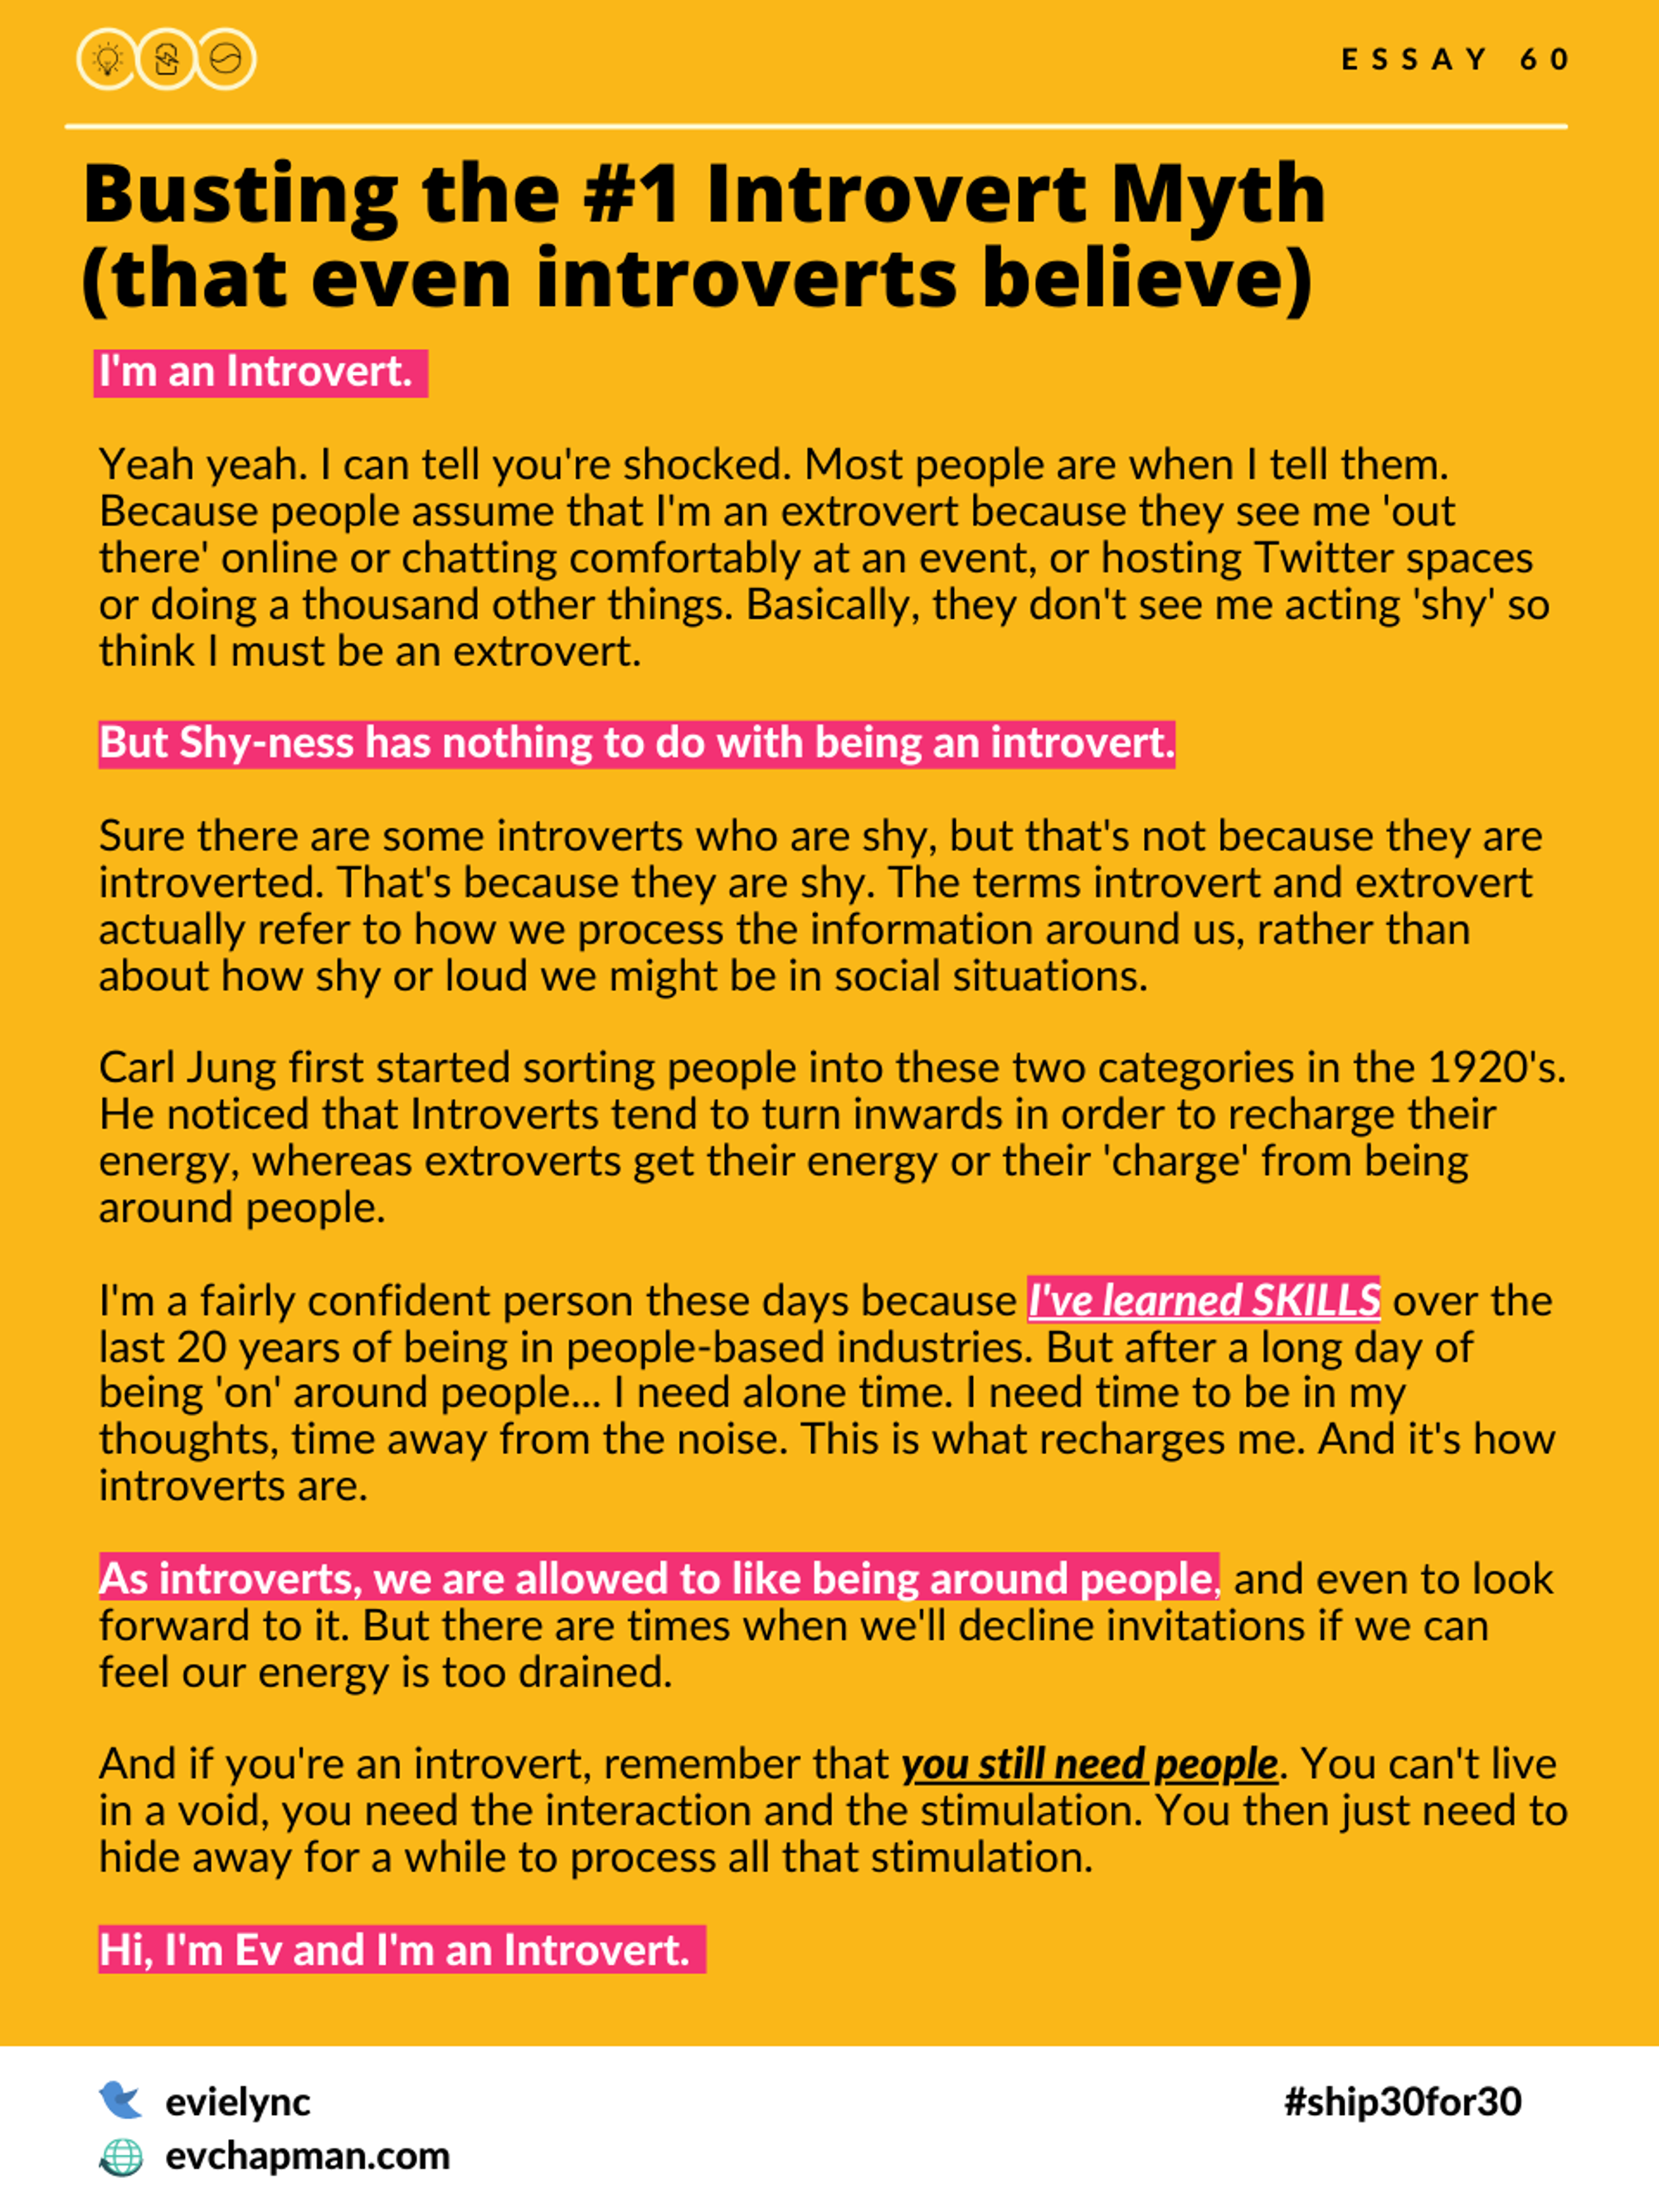 Busting the #1 Introvert Myth (that even introverts believe)